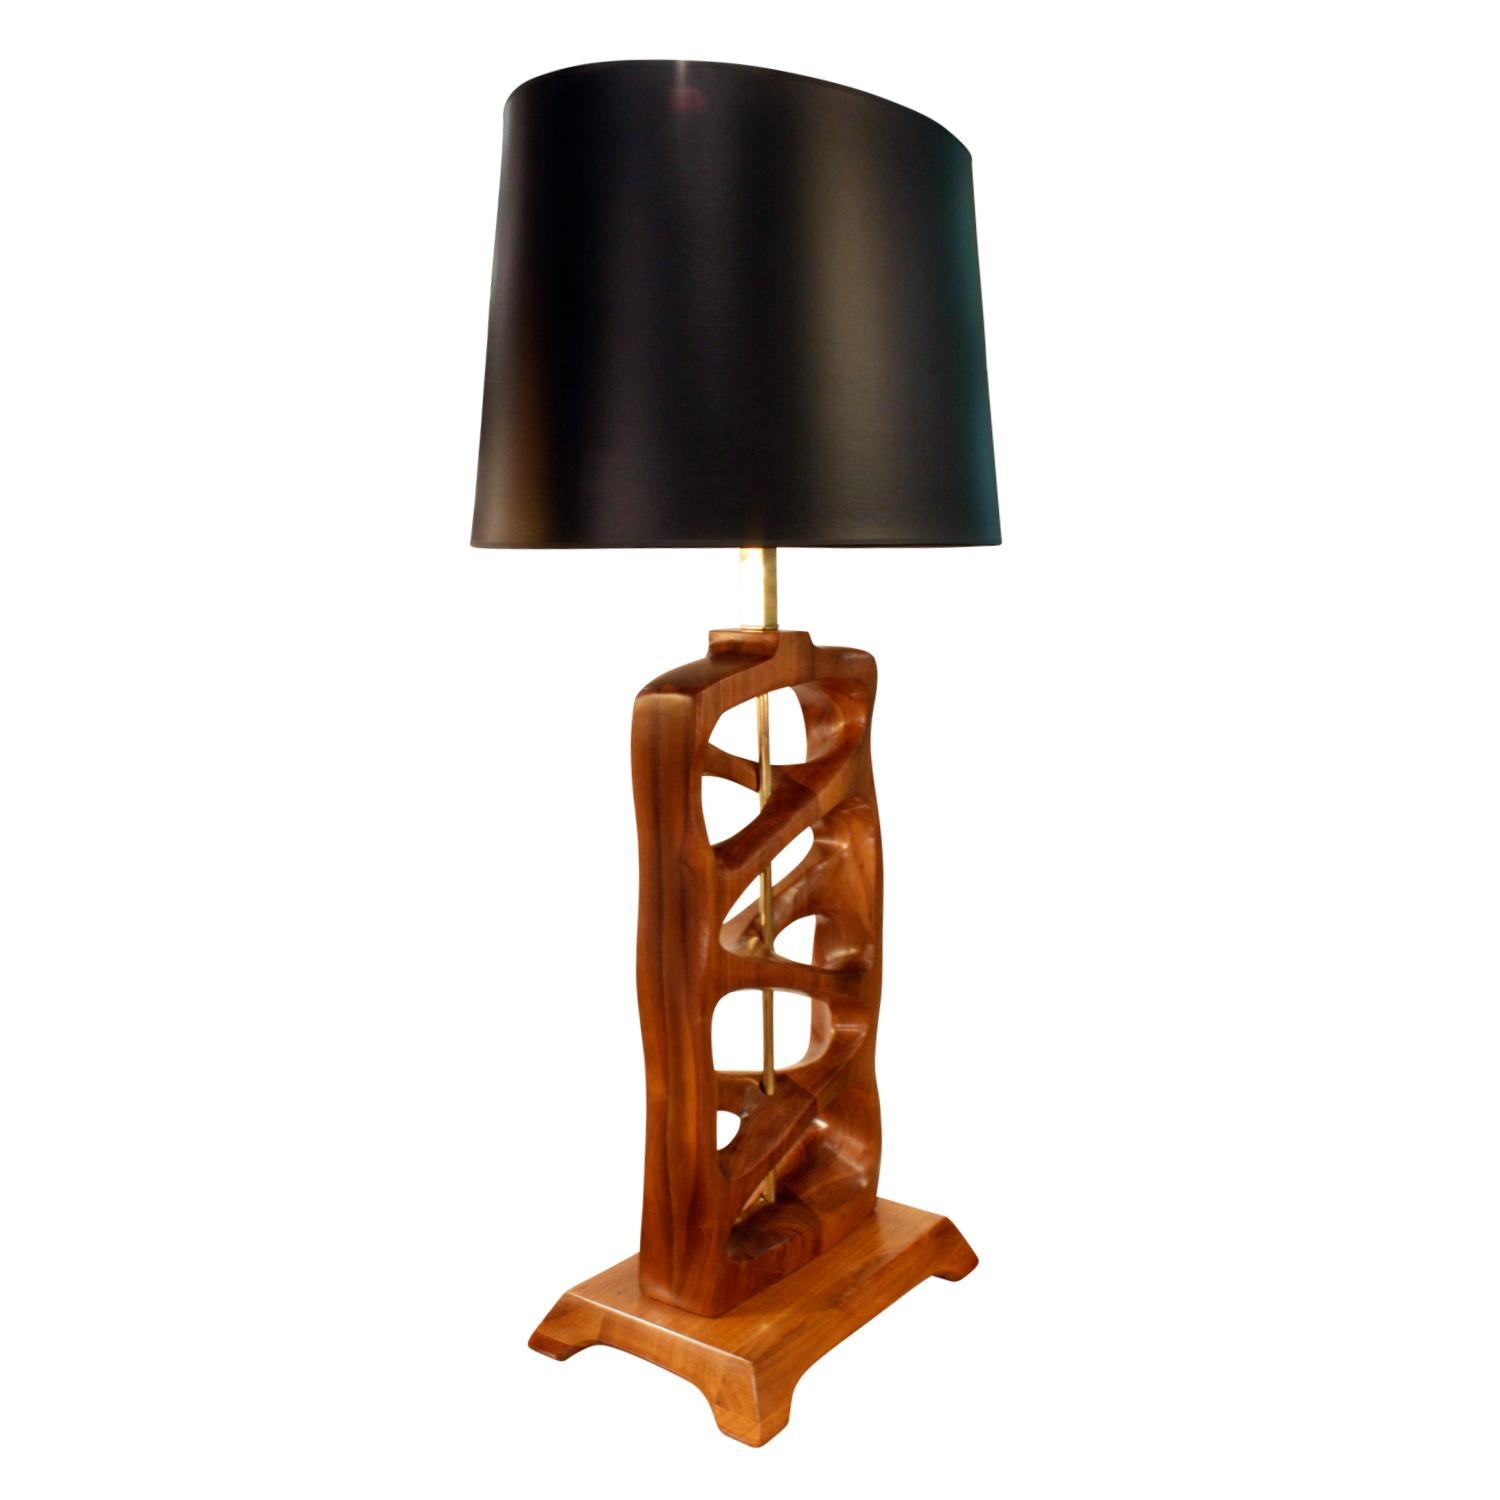 Artisan table lamp with hand carved walnut design, American, 1950s.

Measures: Shade W: 18 inches
Shade D: 13 inches.